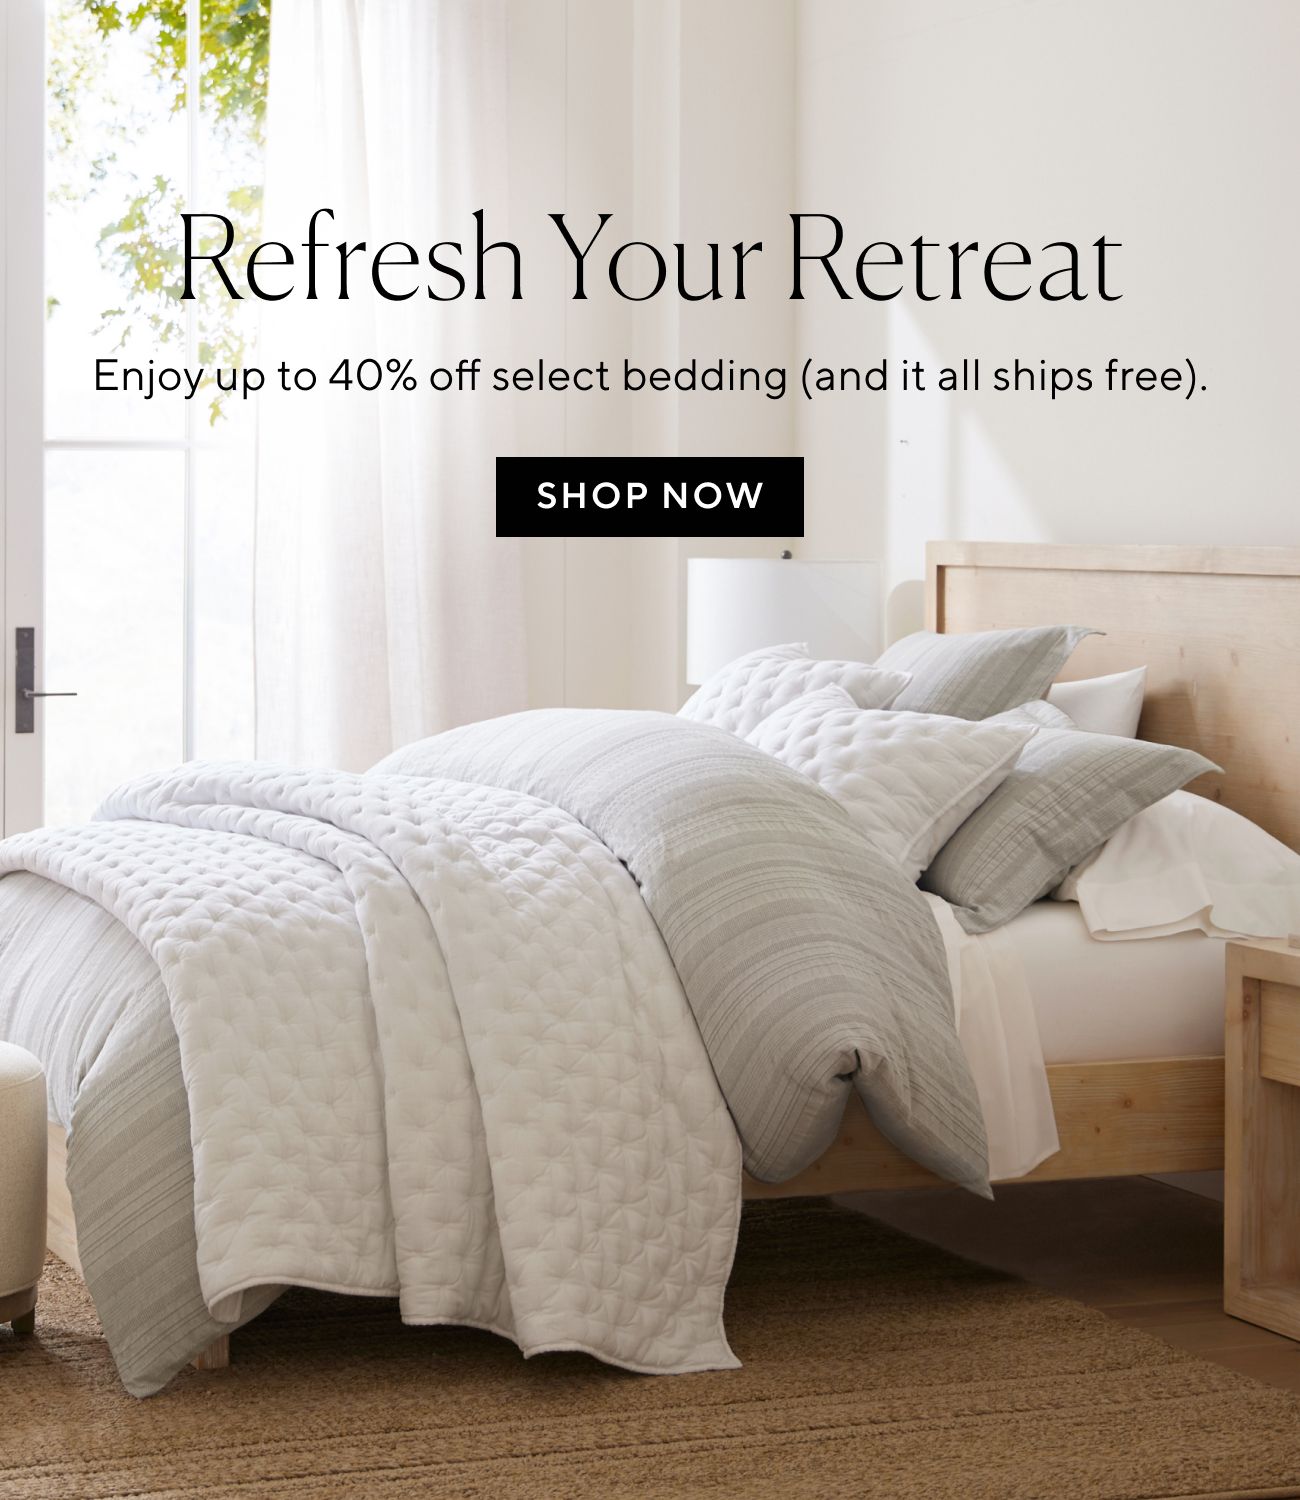  ,5 ?; Refresh Your Retreat Enjoy up to 40% off select bedding and it all ships free. SHOP NOW 